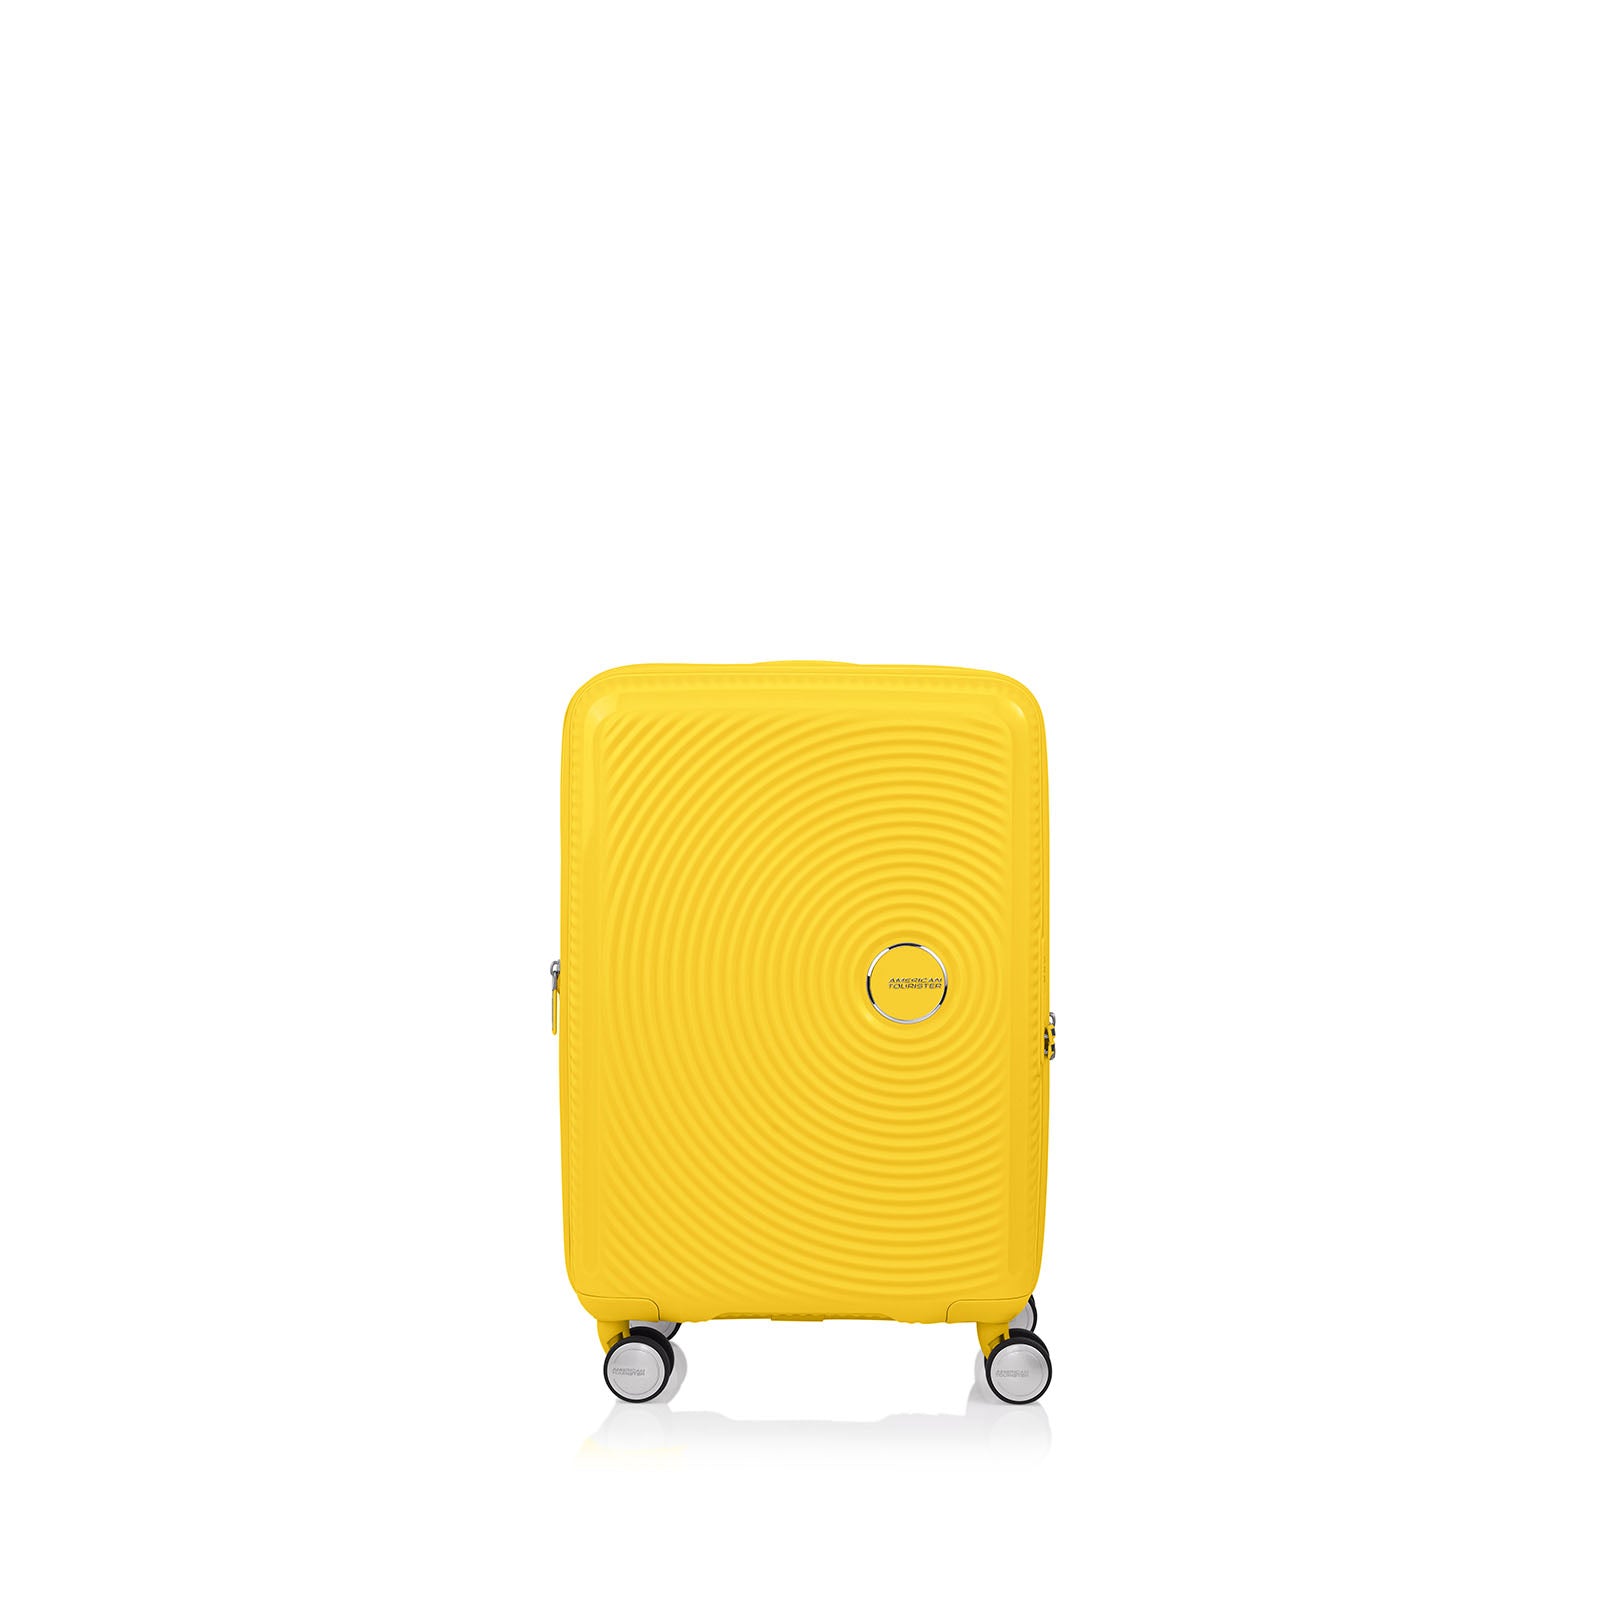 American-Tourister-Curio-2-55cm-Carry-On-Suitcase-Golden-Yellow-Front